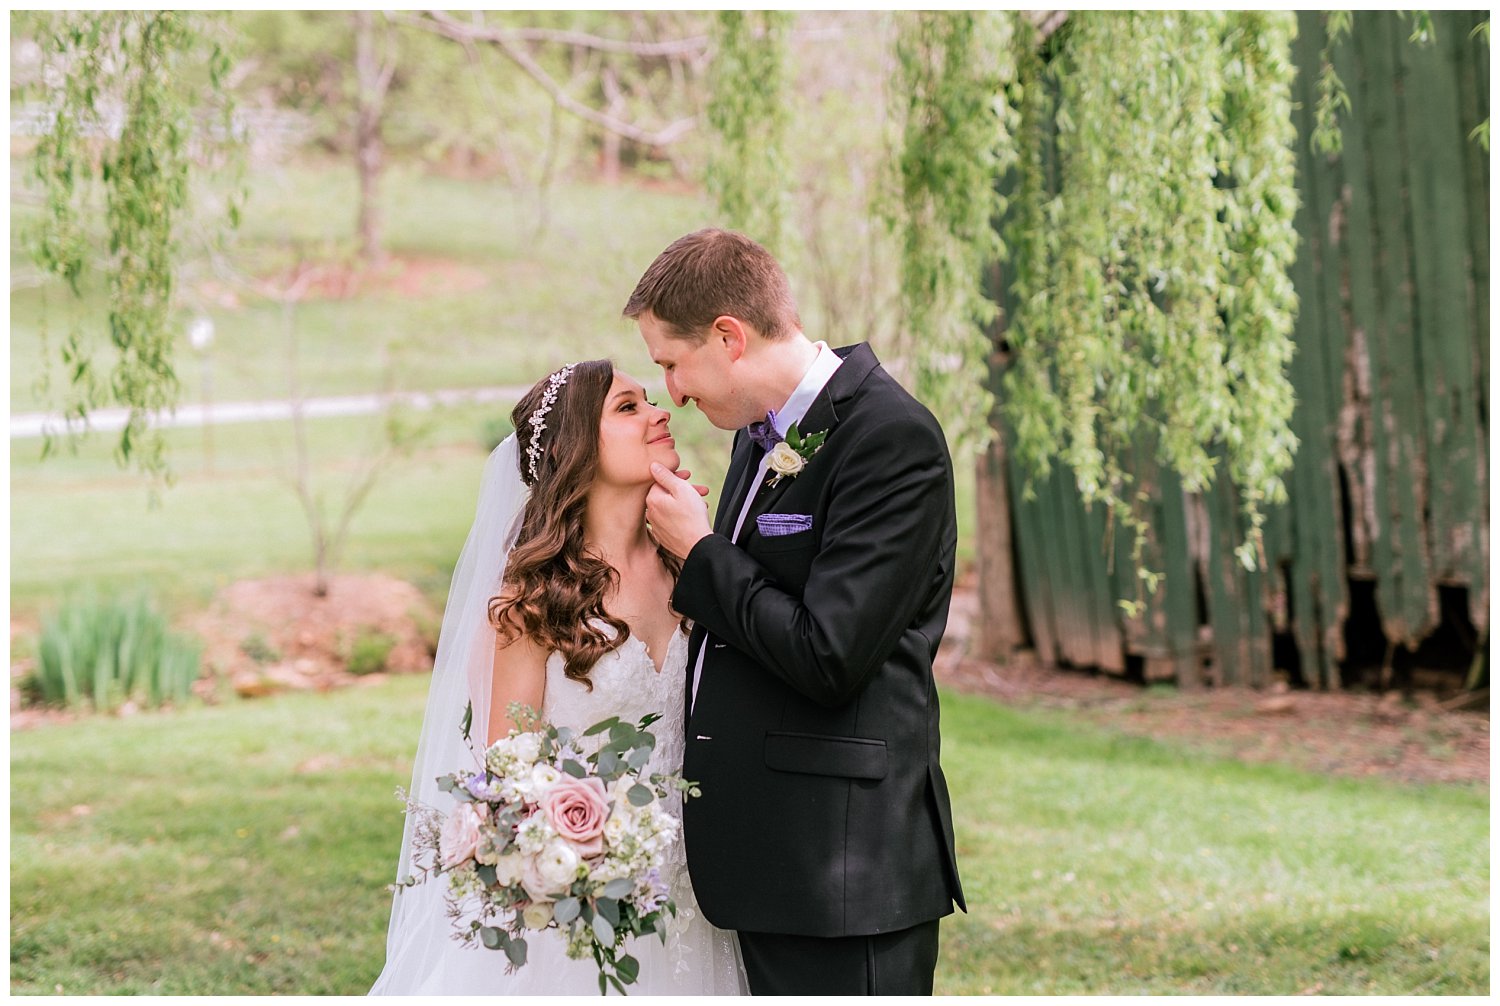 Bride and Groom portraits at their Spring Wedding at The Market at Grelen photographed by Heather Dodge Photography